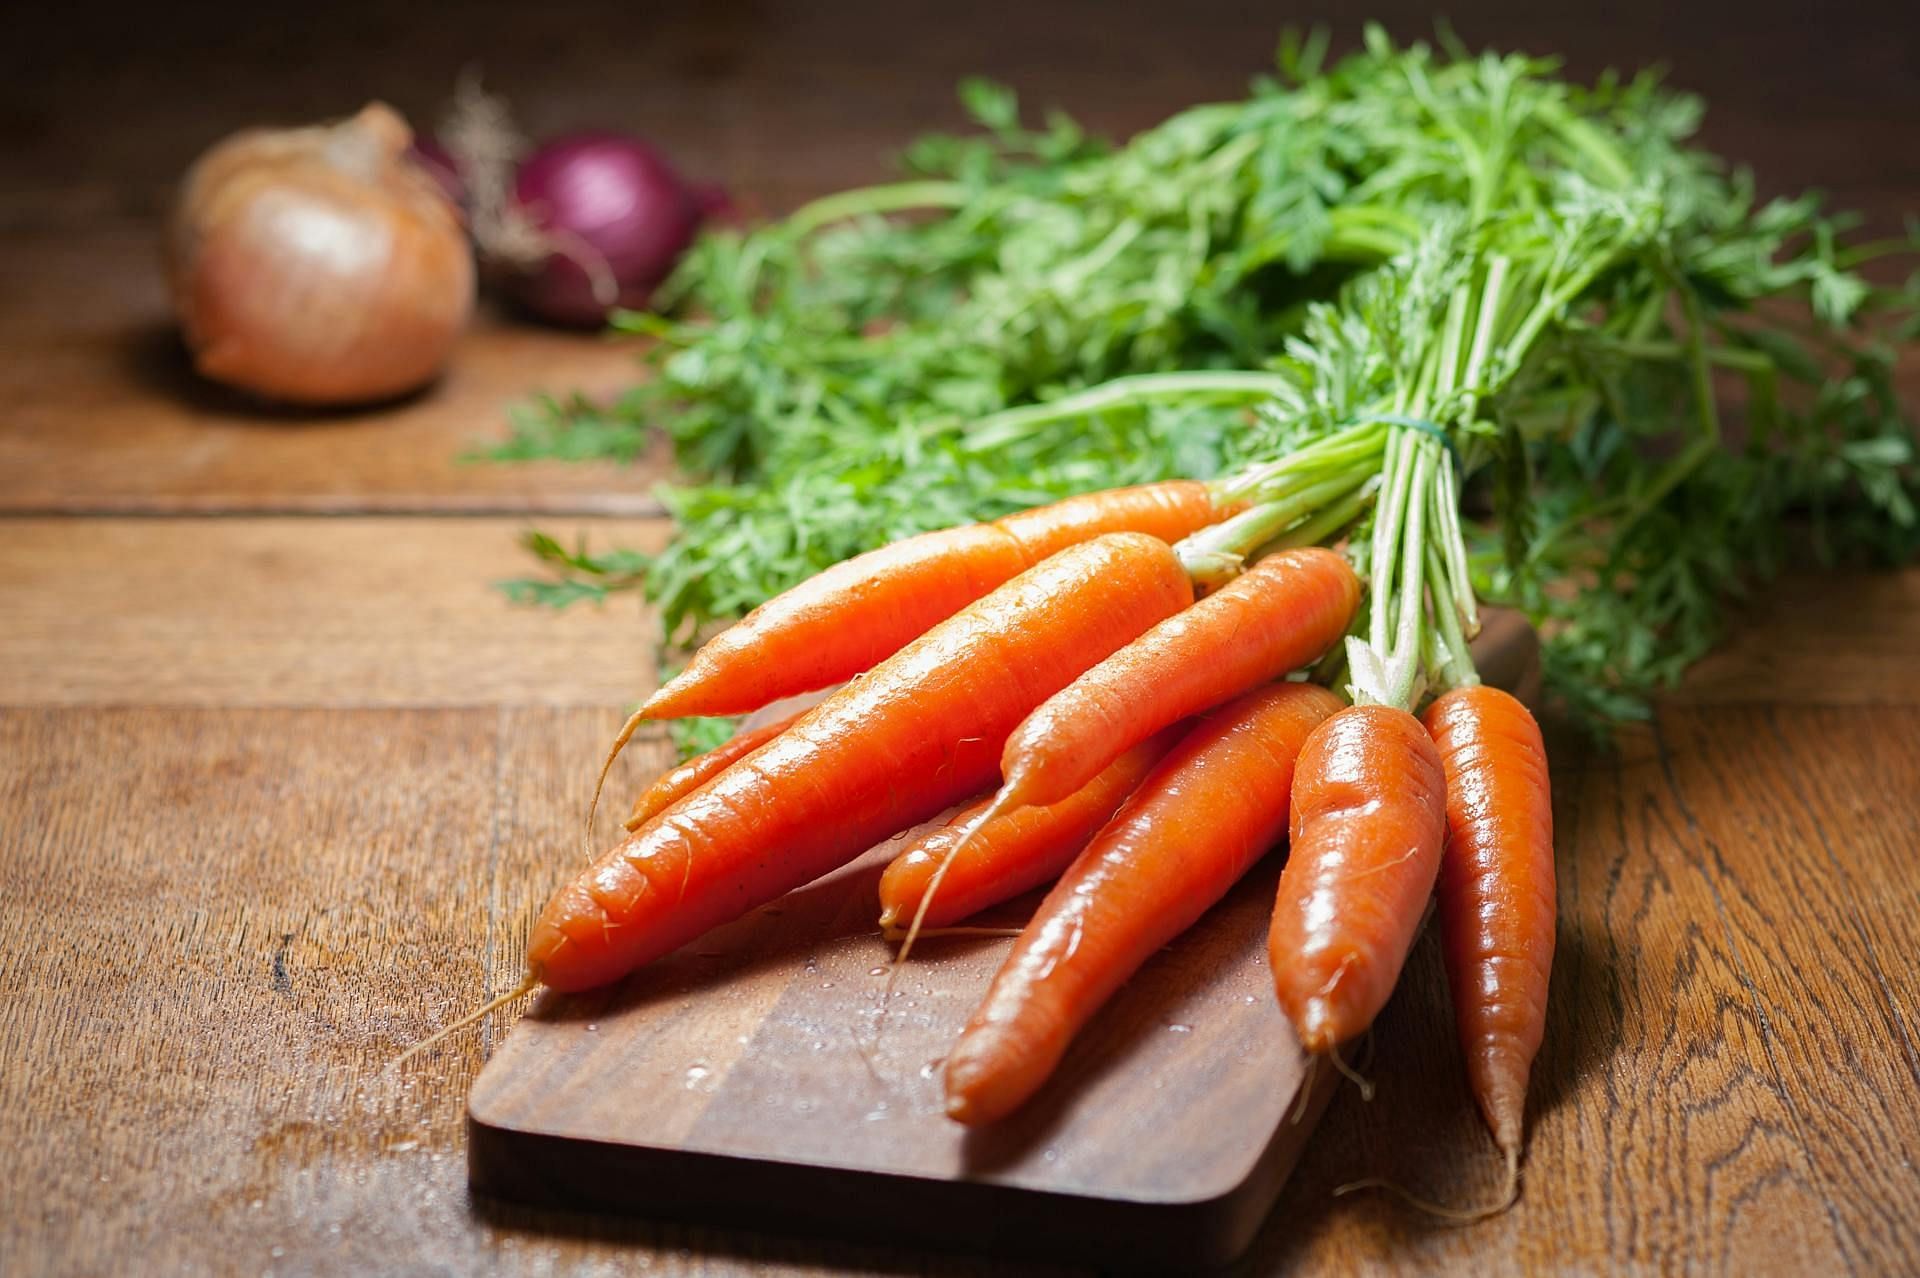 Carrots for glowing skin (image sourced via Pexels / Photo by Mali)